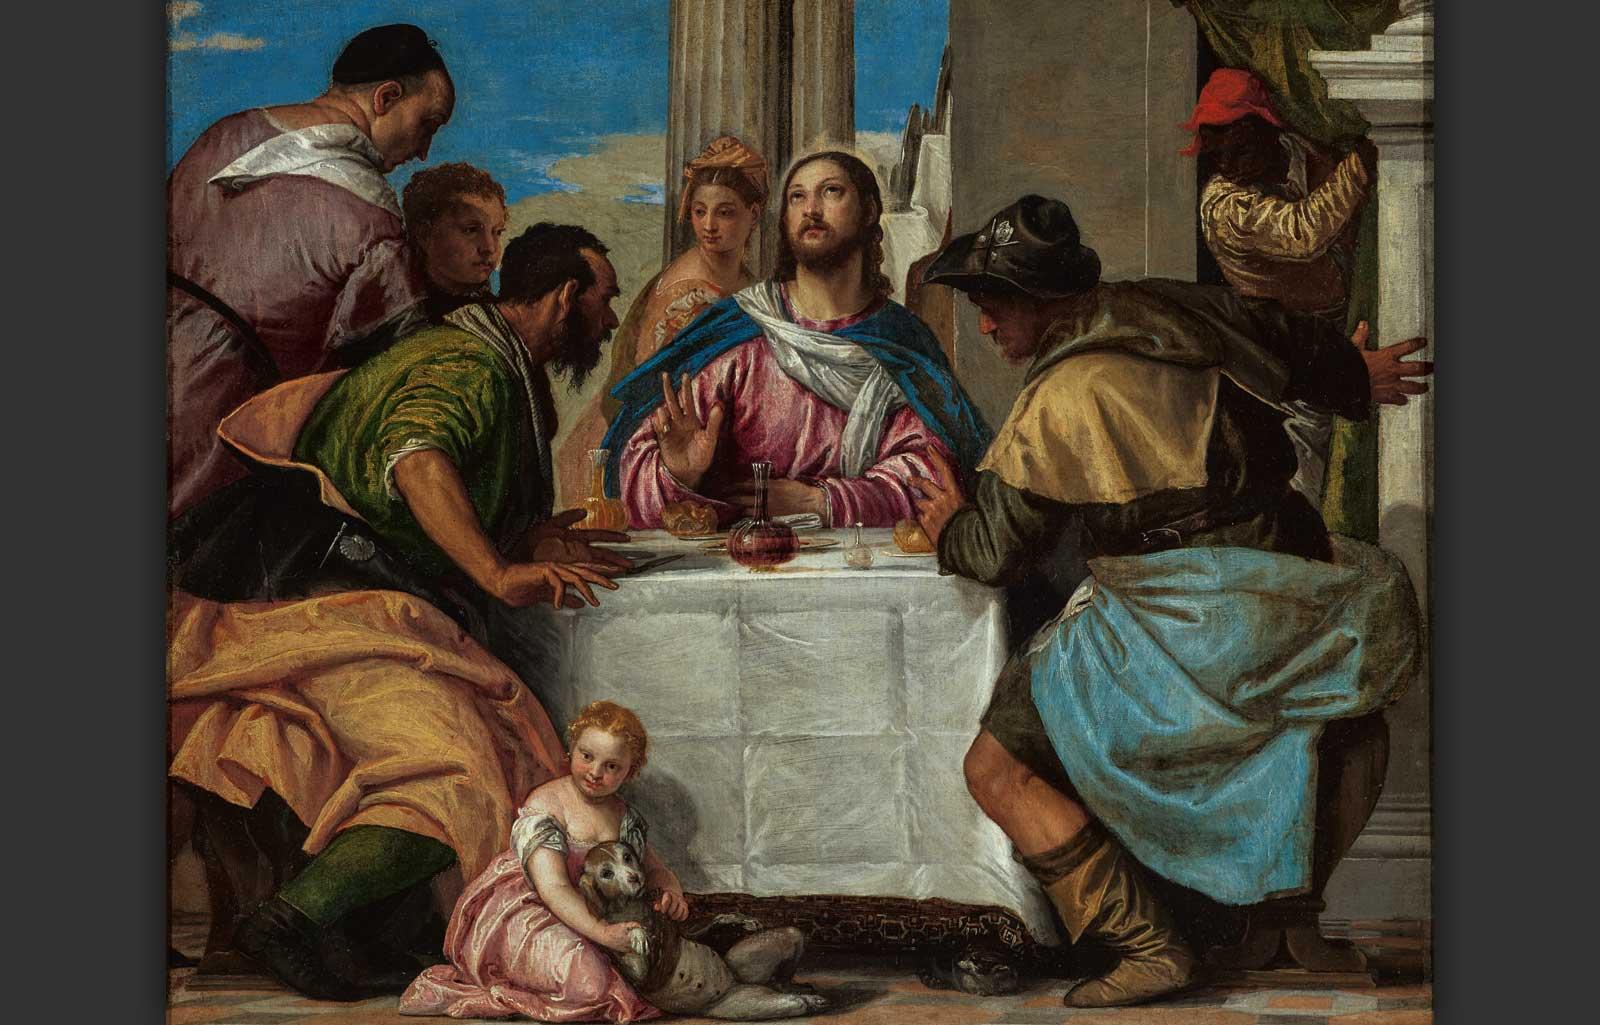 Supper at Emmaus, mid 1570s. Paolo Caliari, called Veronese.